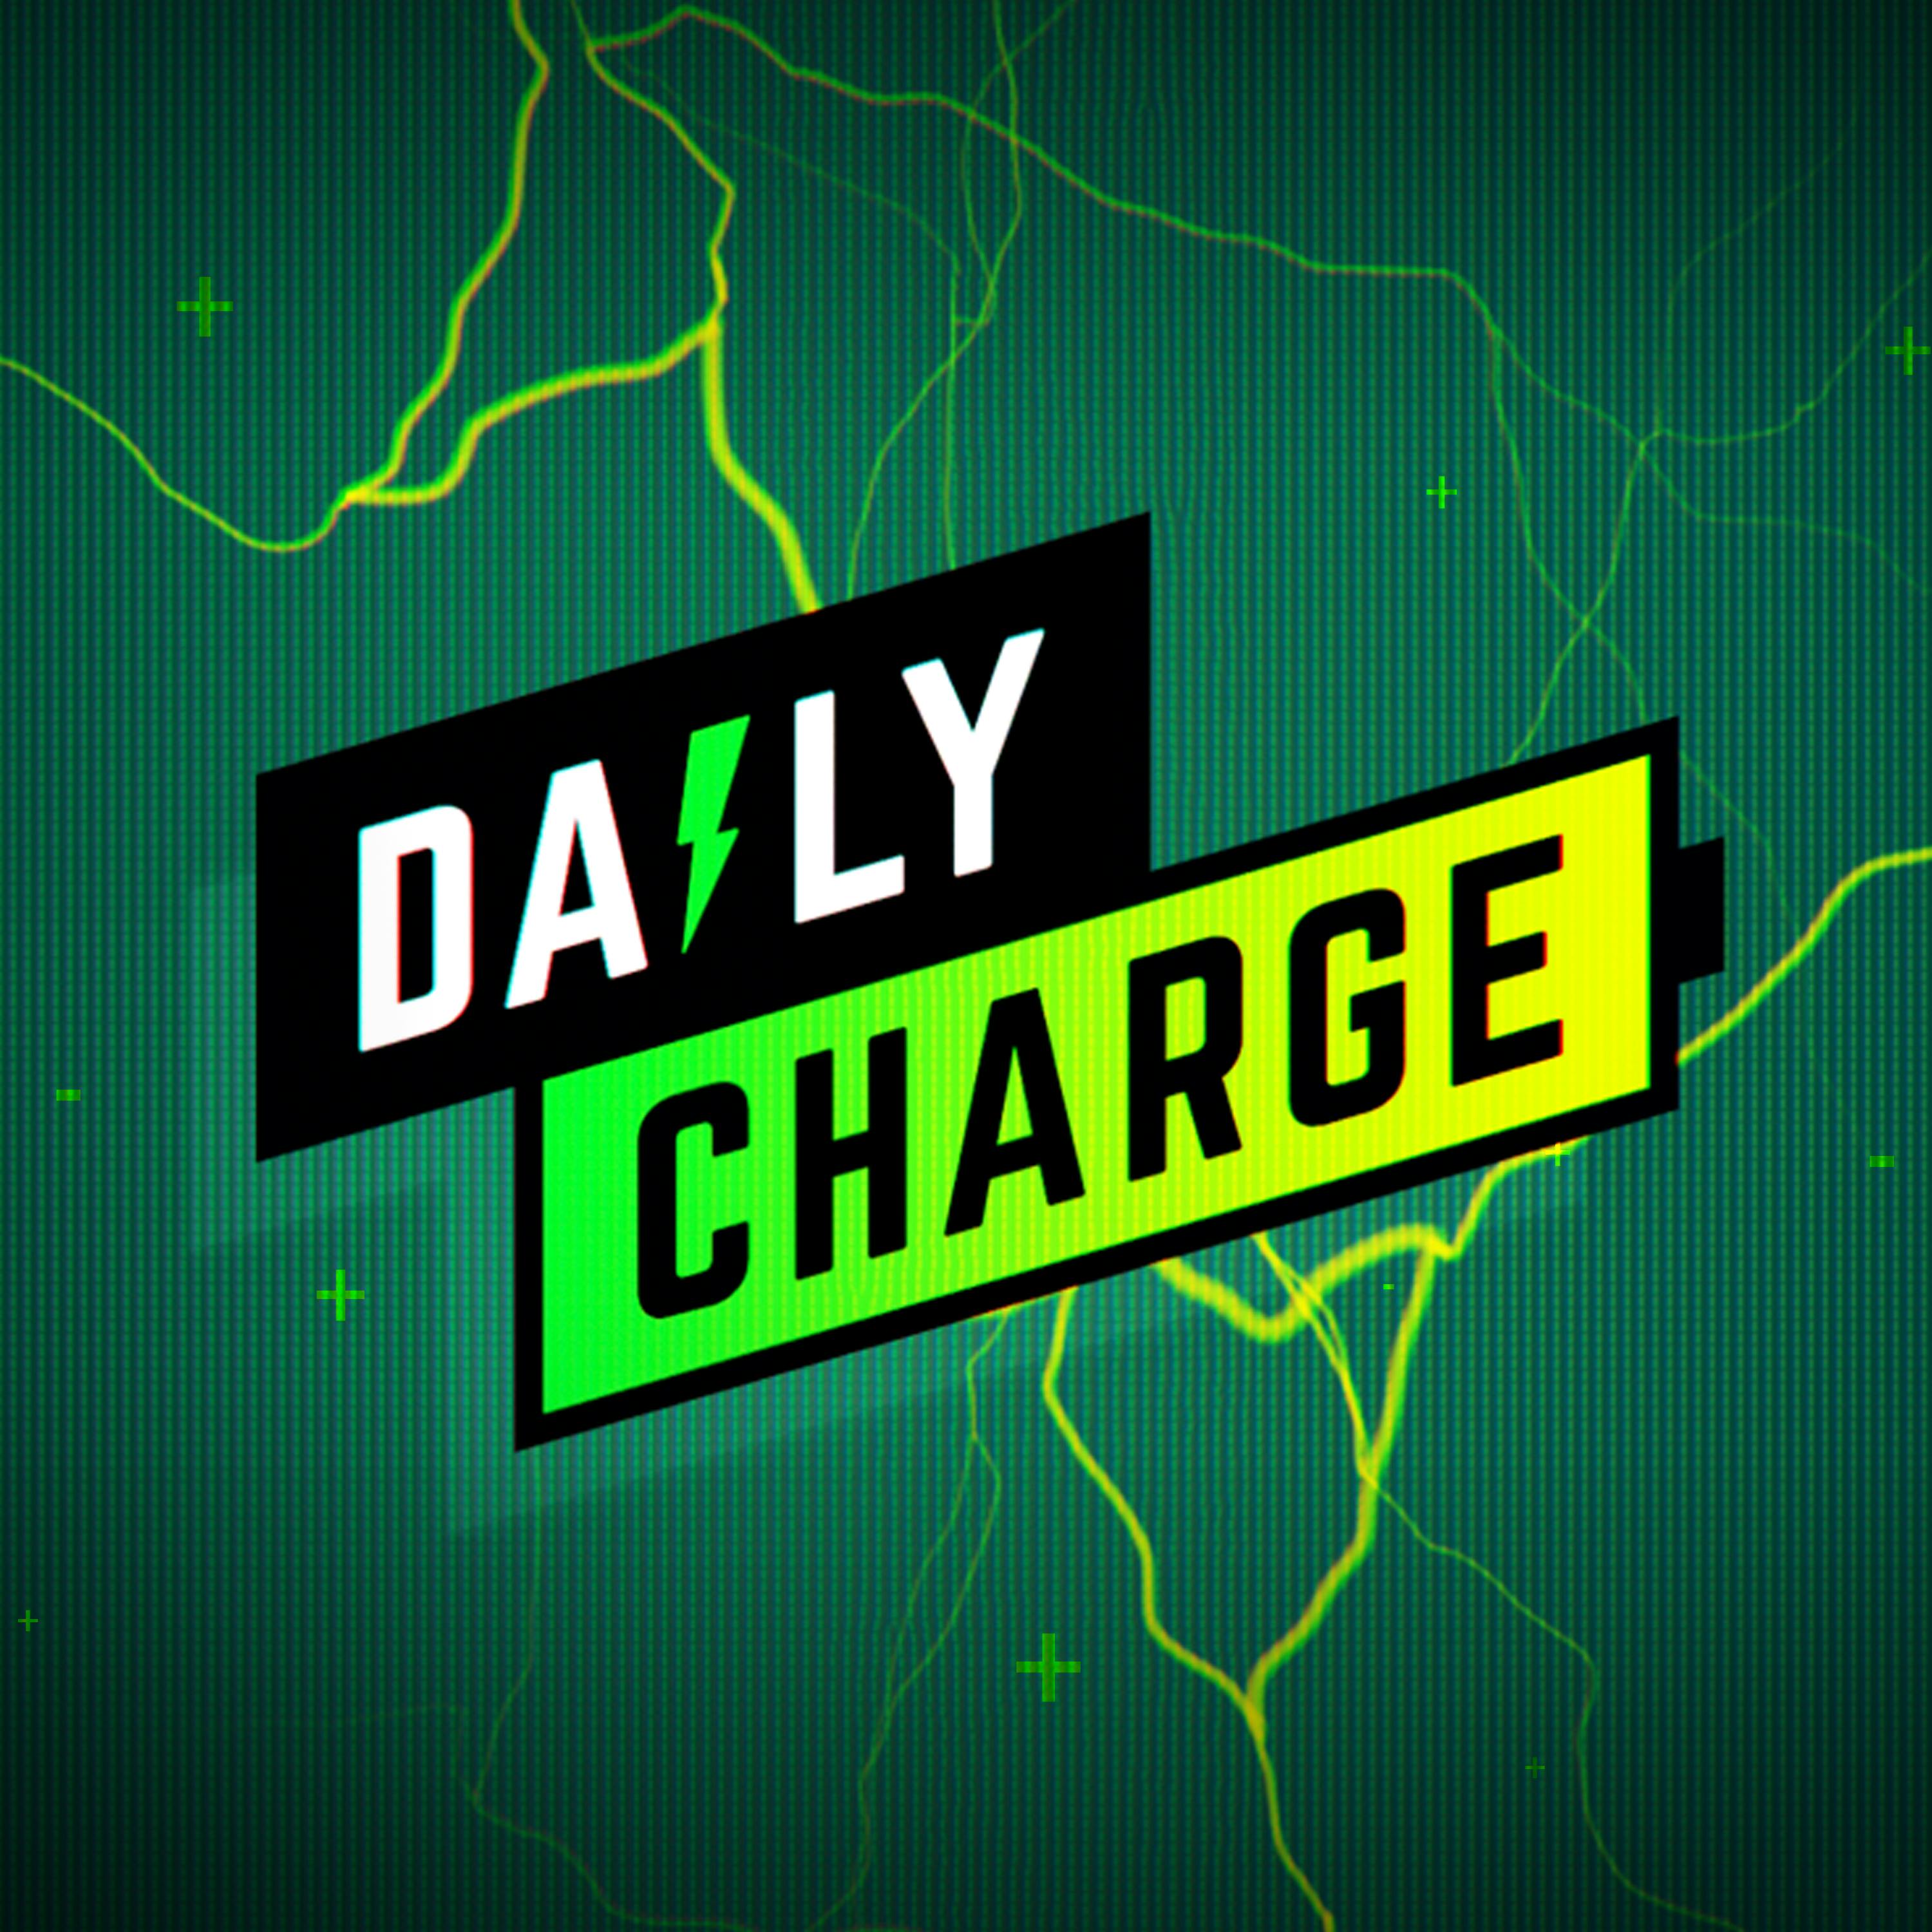 Nvidia’s Beefy Hopper Chip Could Speed Up AI Development (The Daily Charge, 5/5/2022)